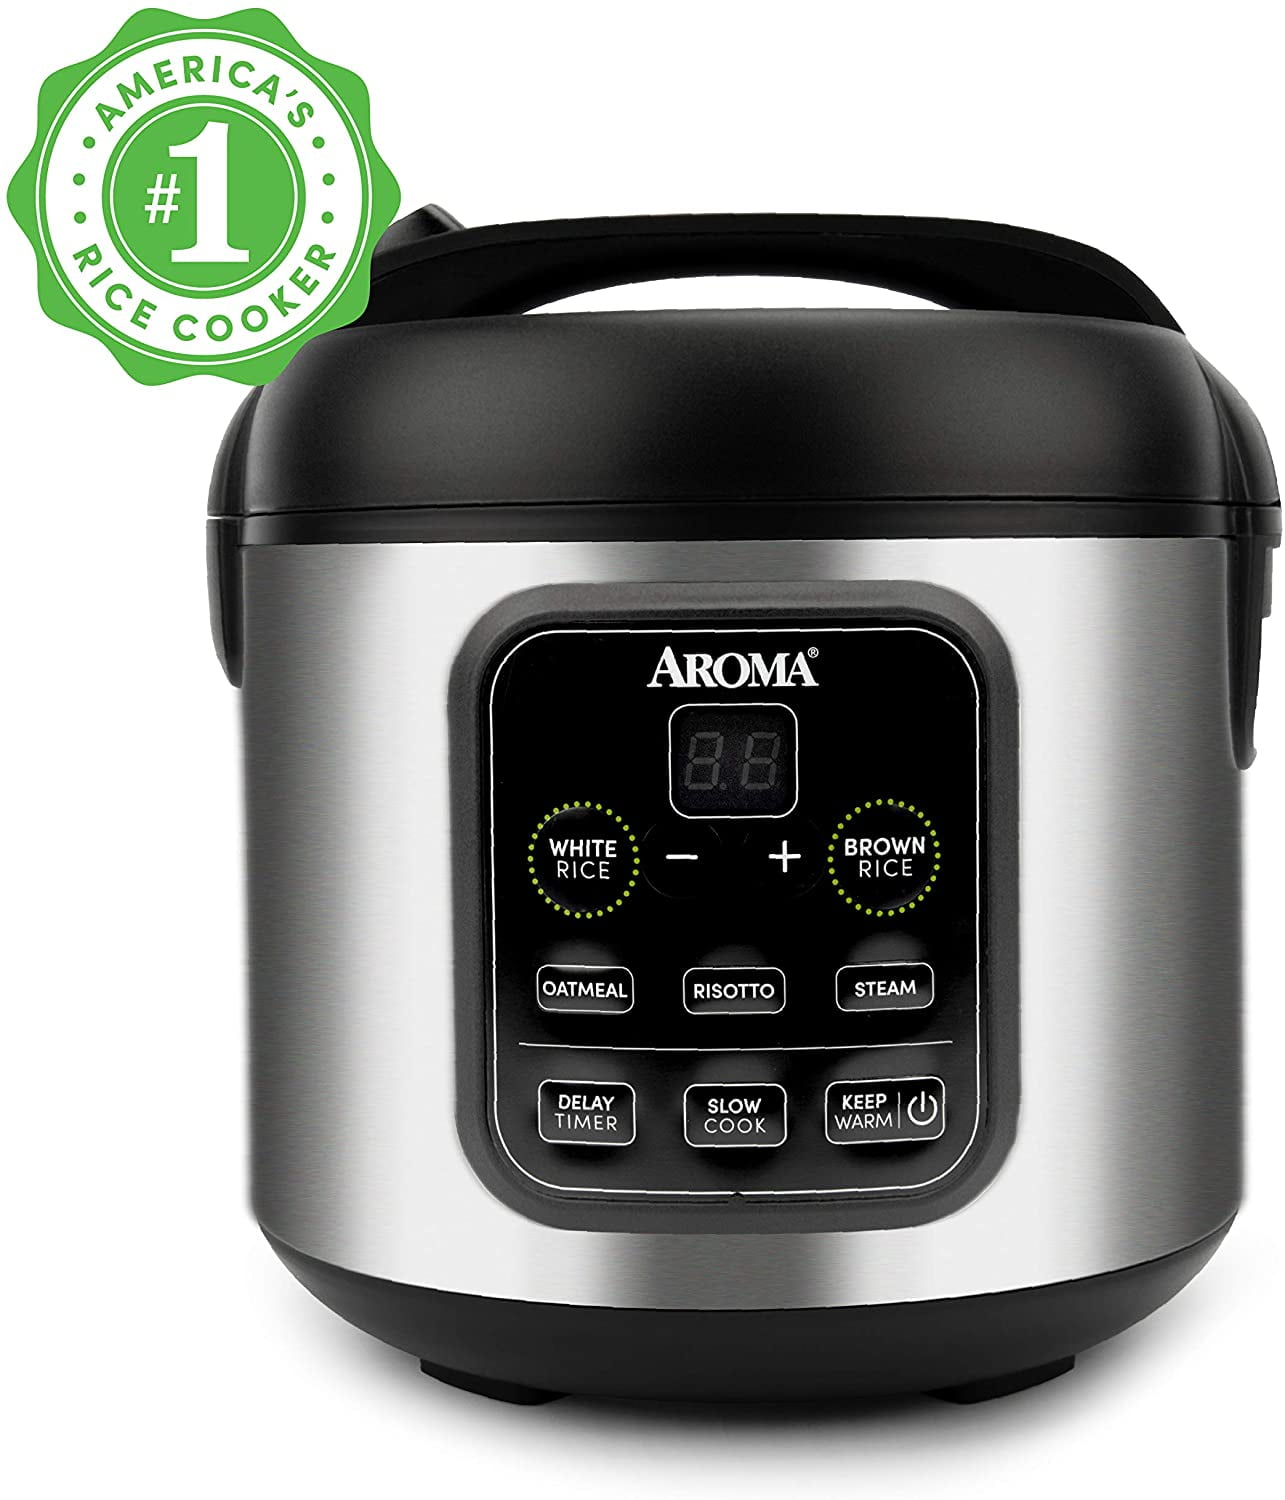 Details about   Aroma Stainless Steel Kitchen Food Steamer And Digital Rice Warmer Cooker 8 Cup 